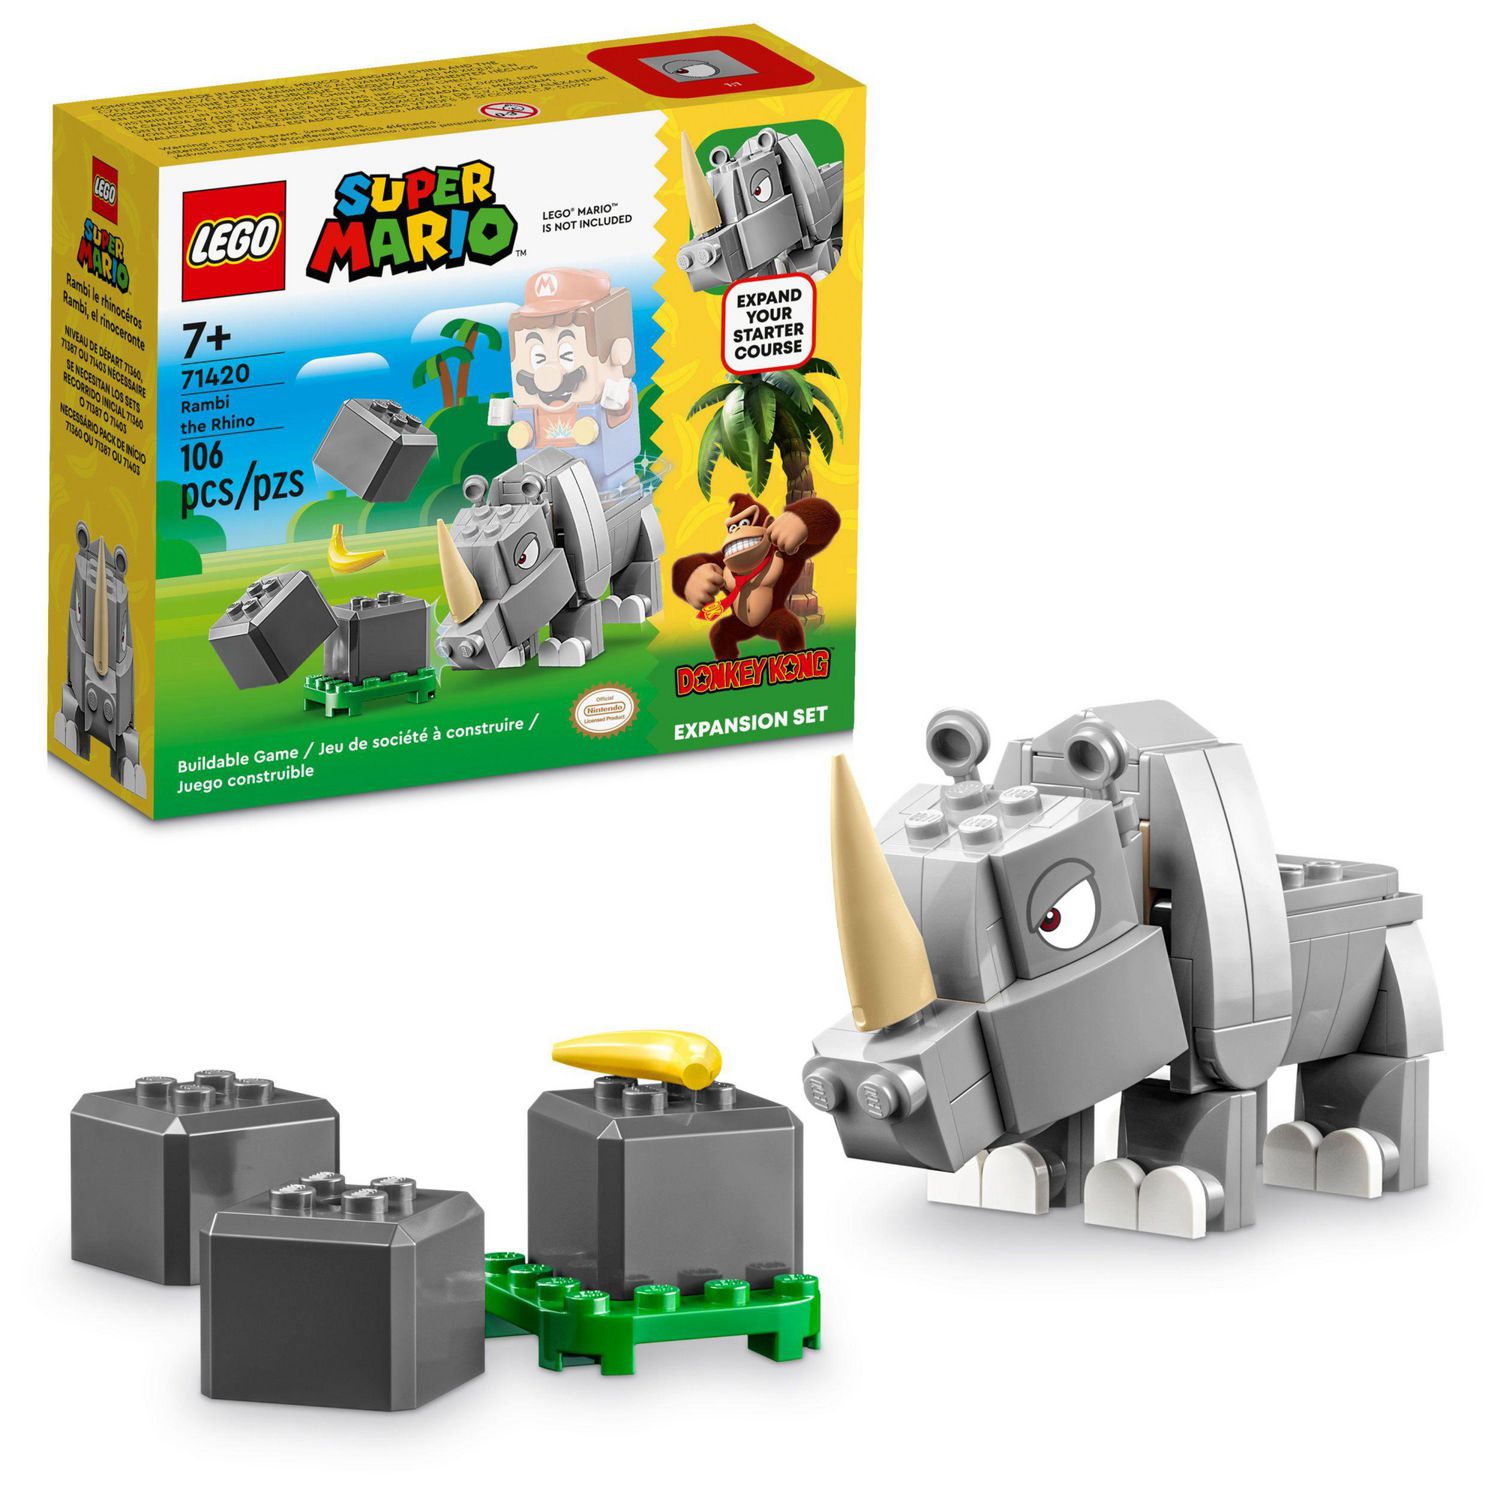 LEGO Super Mario Rambi the Rhino Expansion Set 71420, Game Inspired Building  Toy Set to Combine with a Starter Course, this Collectible Super Mario Bros  Toy Makes a Great Gift for Kids Ages 7 and Up, Includes 106 Pieces, Ages 7+  